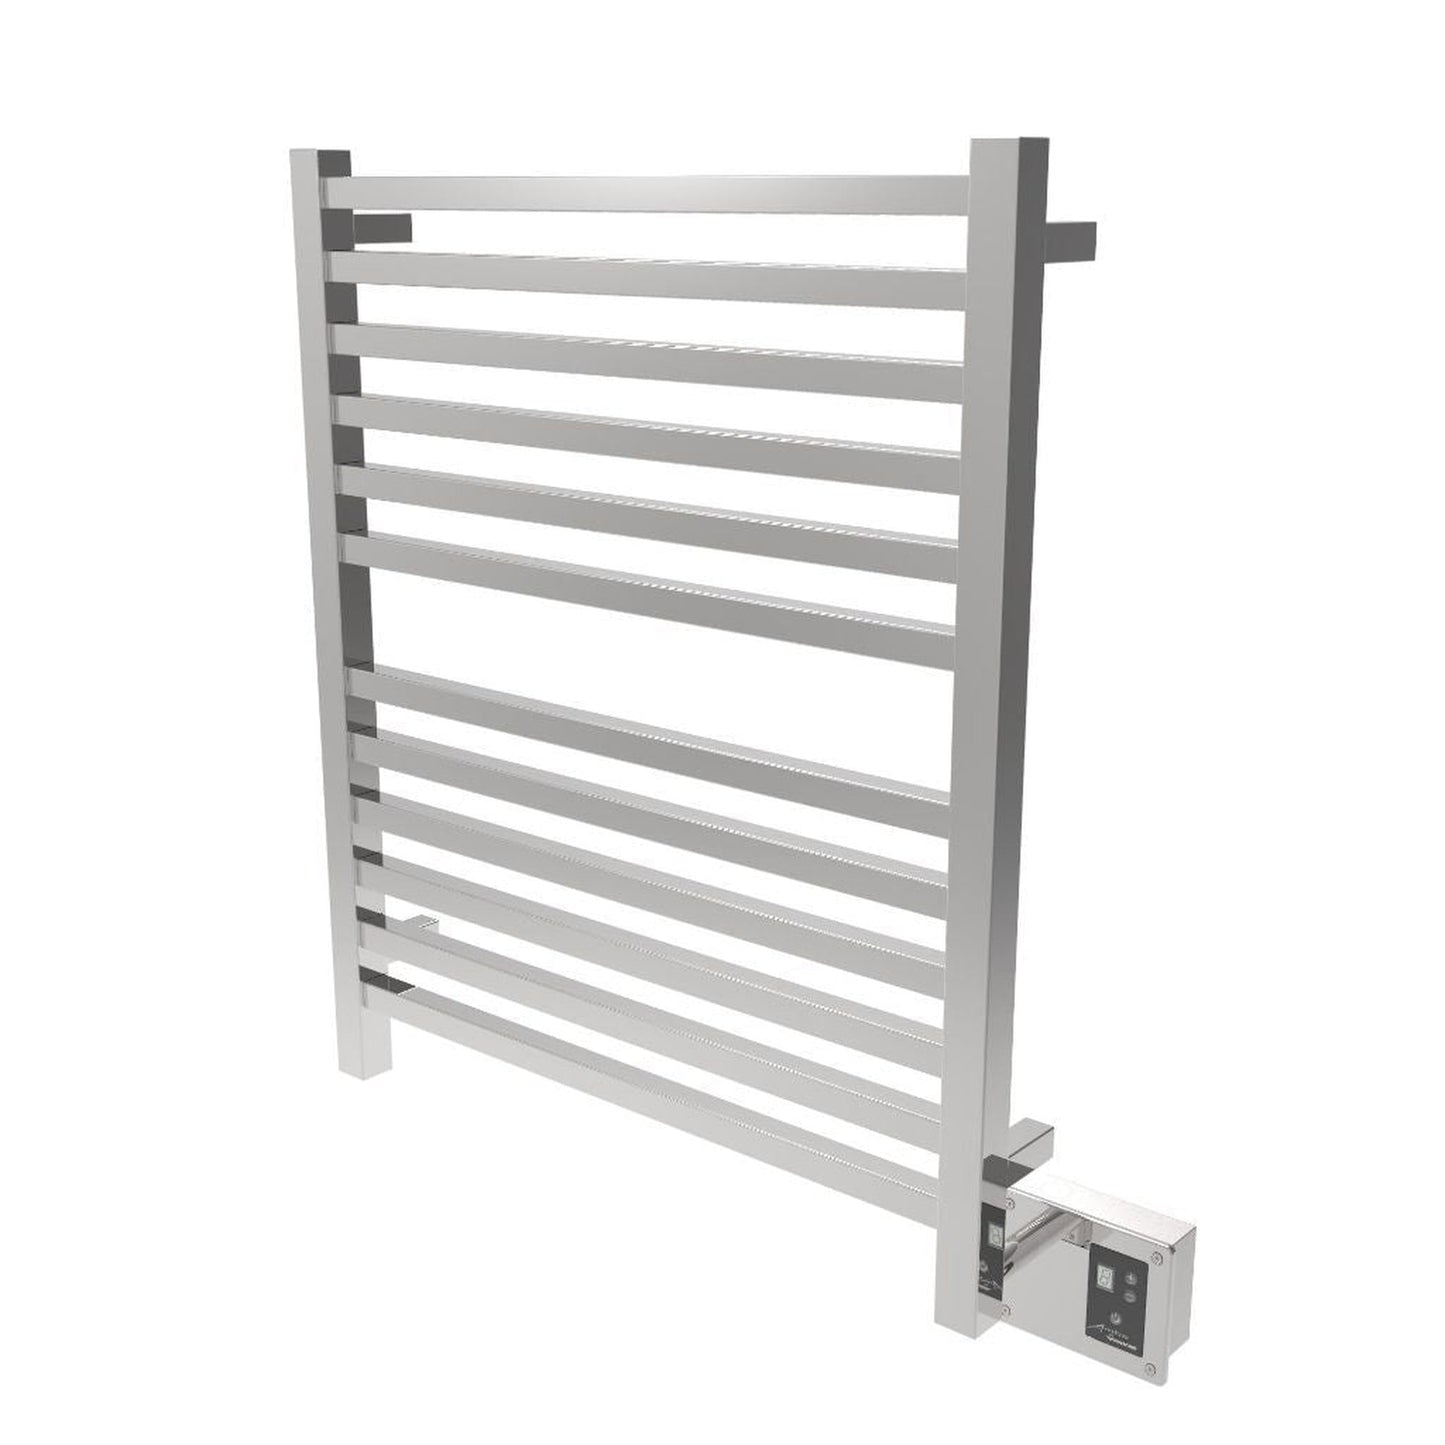 Amba Quadro 28" x 33" 12-Bar Polished Stainless Steel Hardwired Towel Warmer With Digital Heat Controller